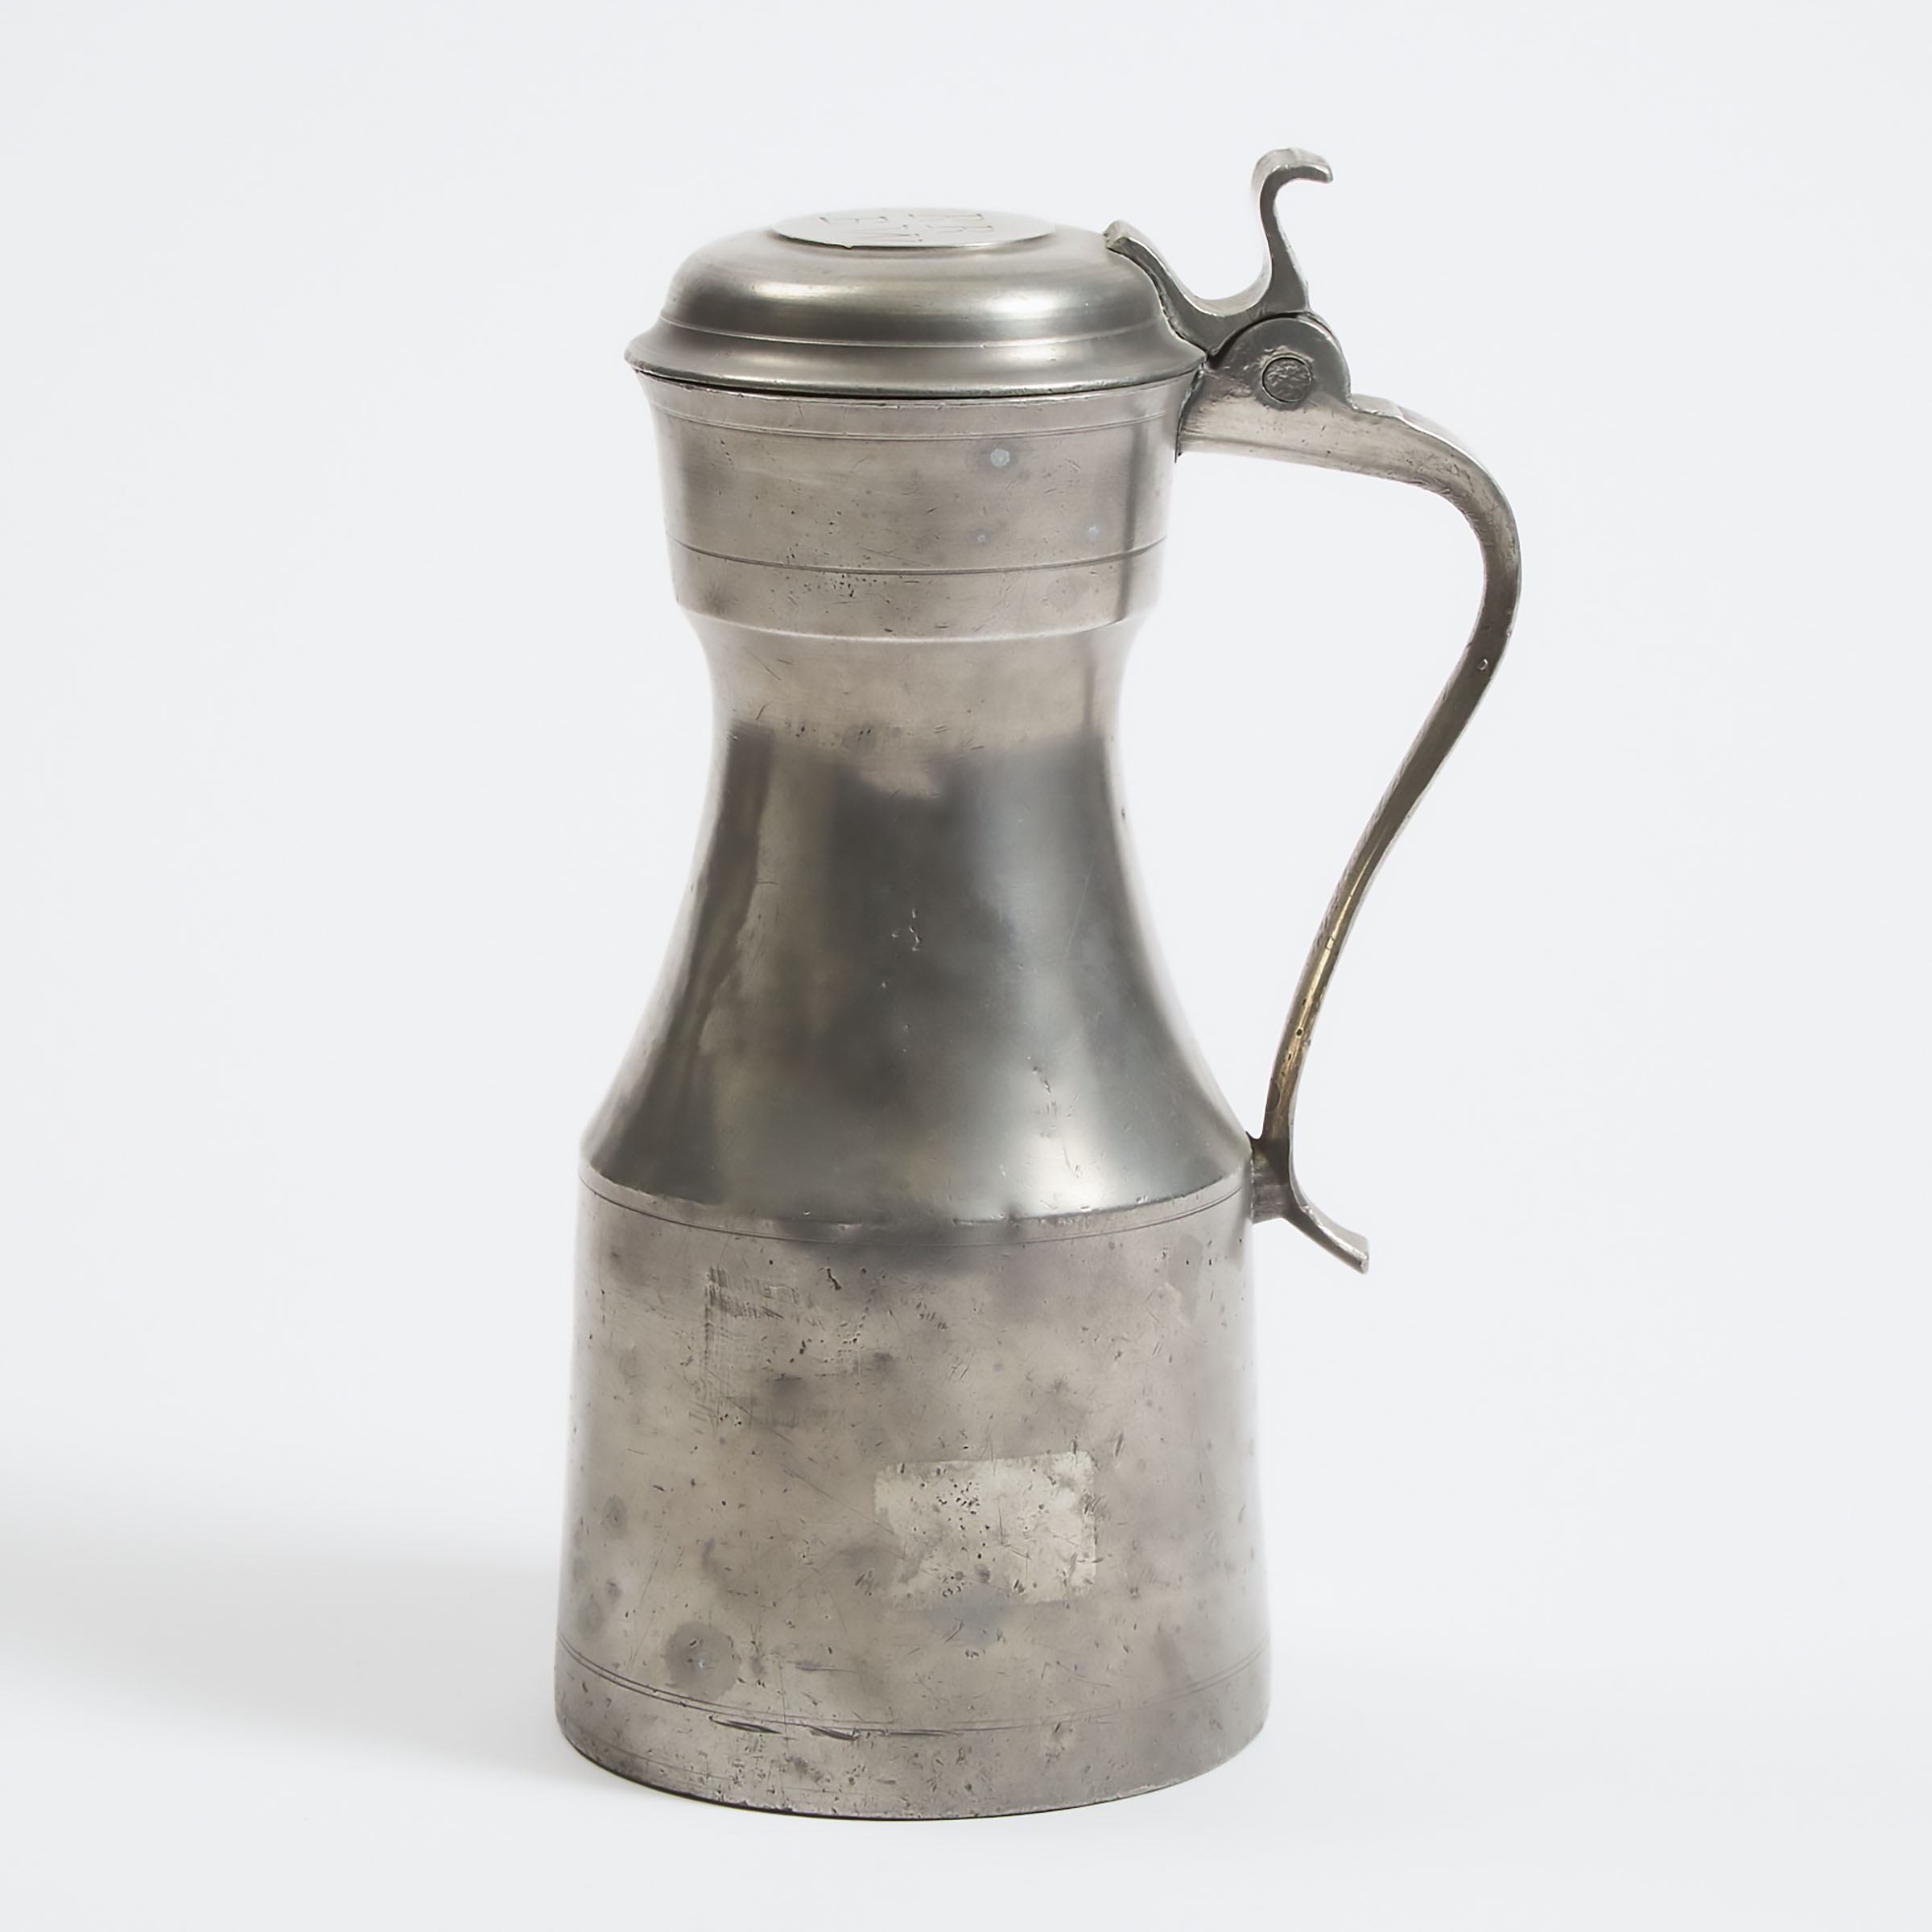 Scottish Pewter Uncrested Tappit Hen, 19th century